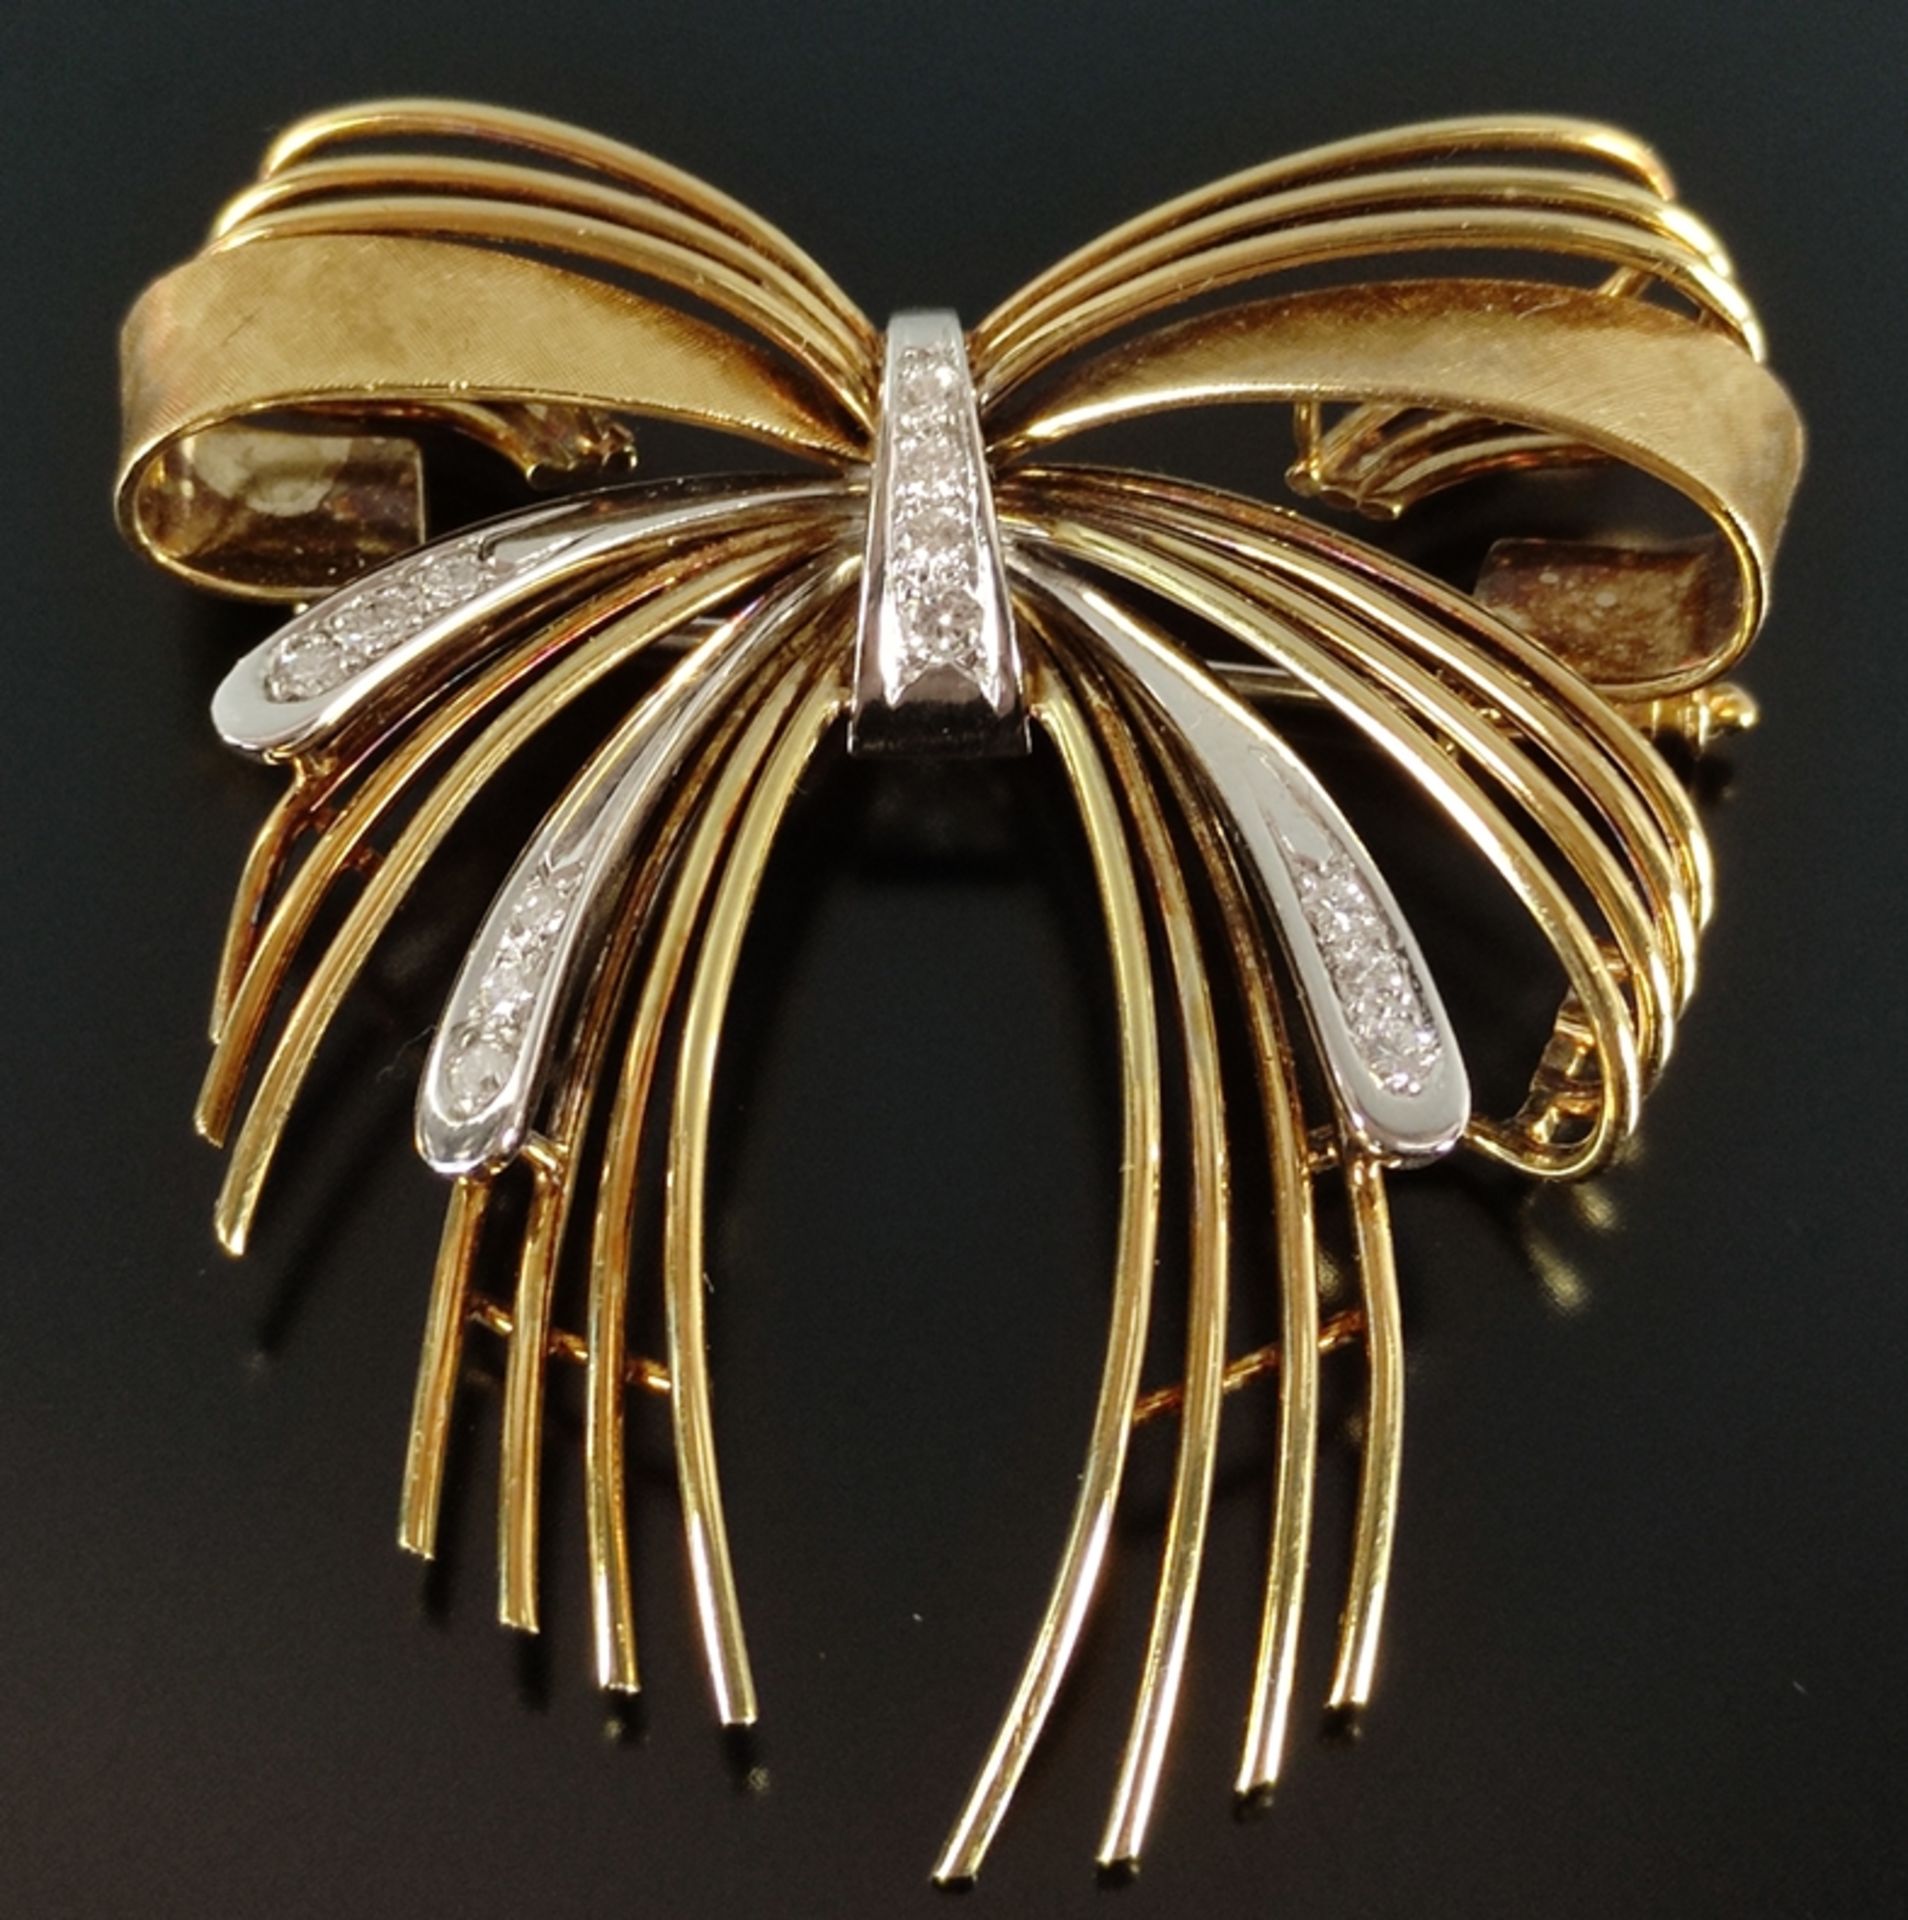 Bow brooch, vintage, set with small diamonds, 750/18K white yellow gold, 1950-1960, 18,7g, size 5x4